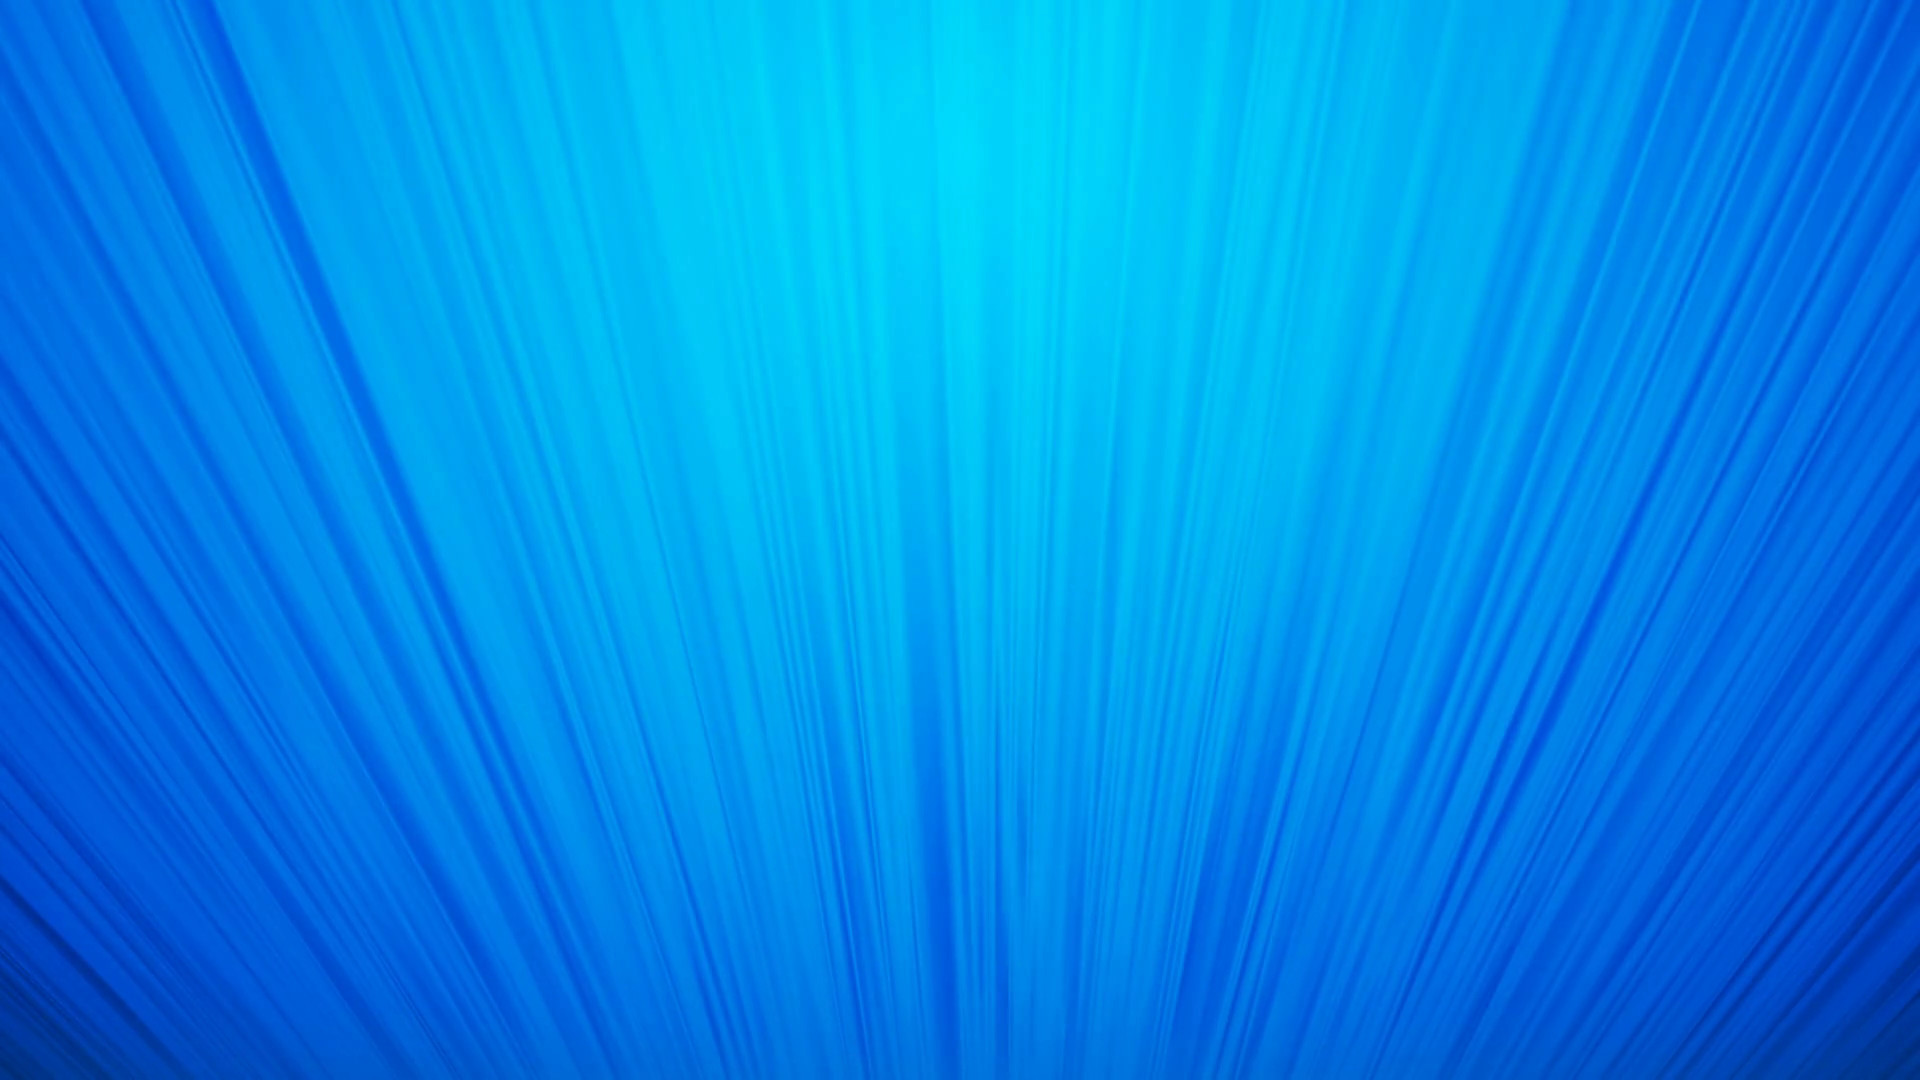 1920x1080 Seamless loop, Abstract cool blue swirl waves background flying particles  in light beams. UHD 4k 3840x2160. Motion Background - Storyblocks Video